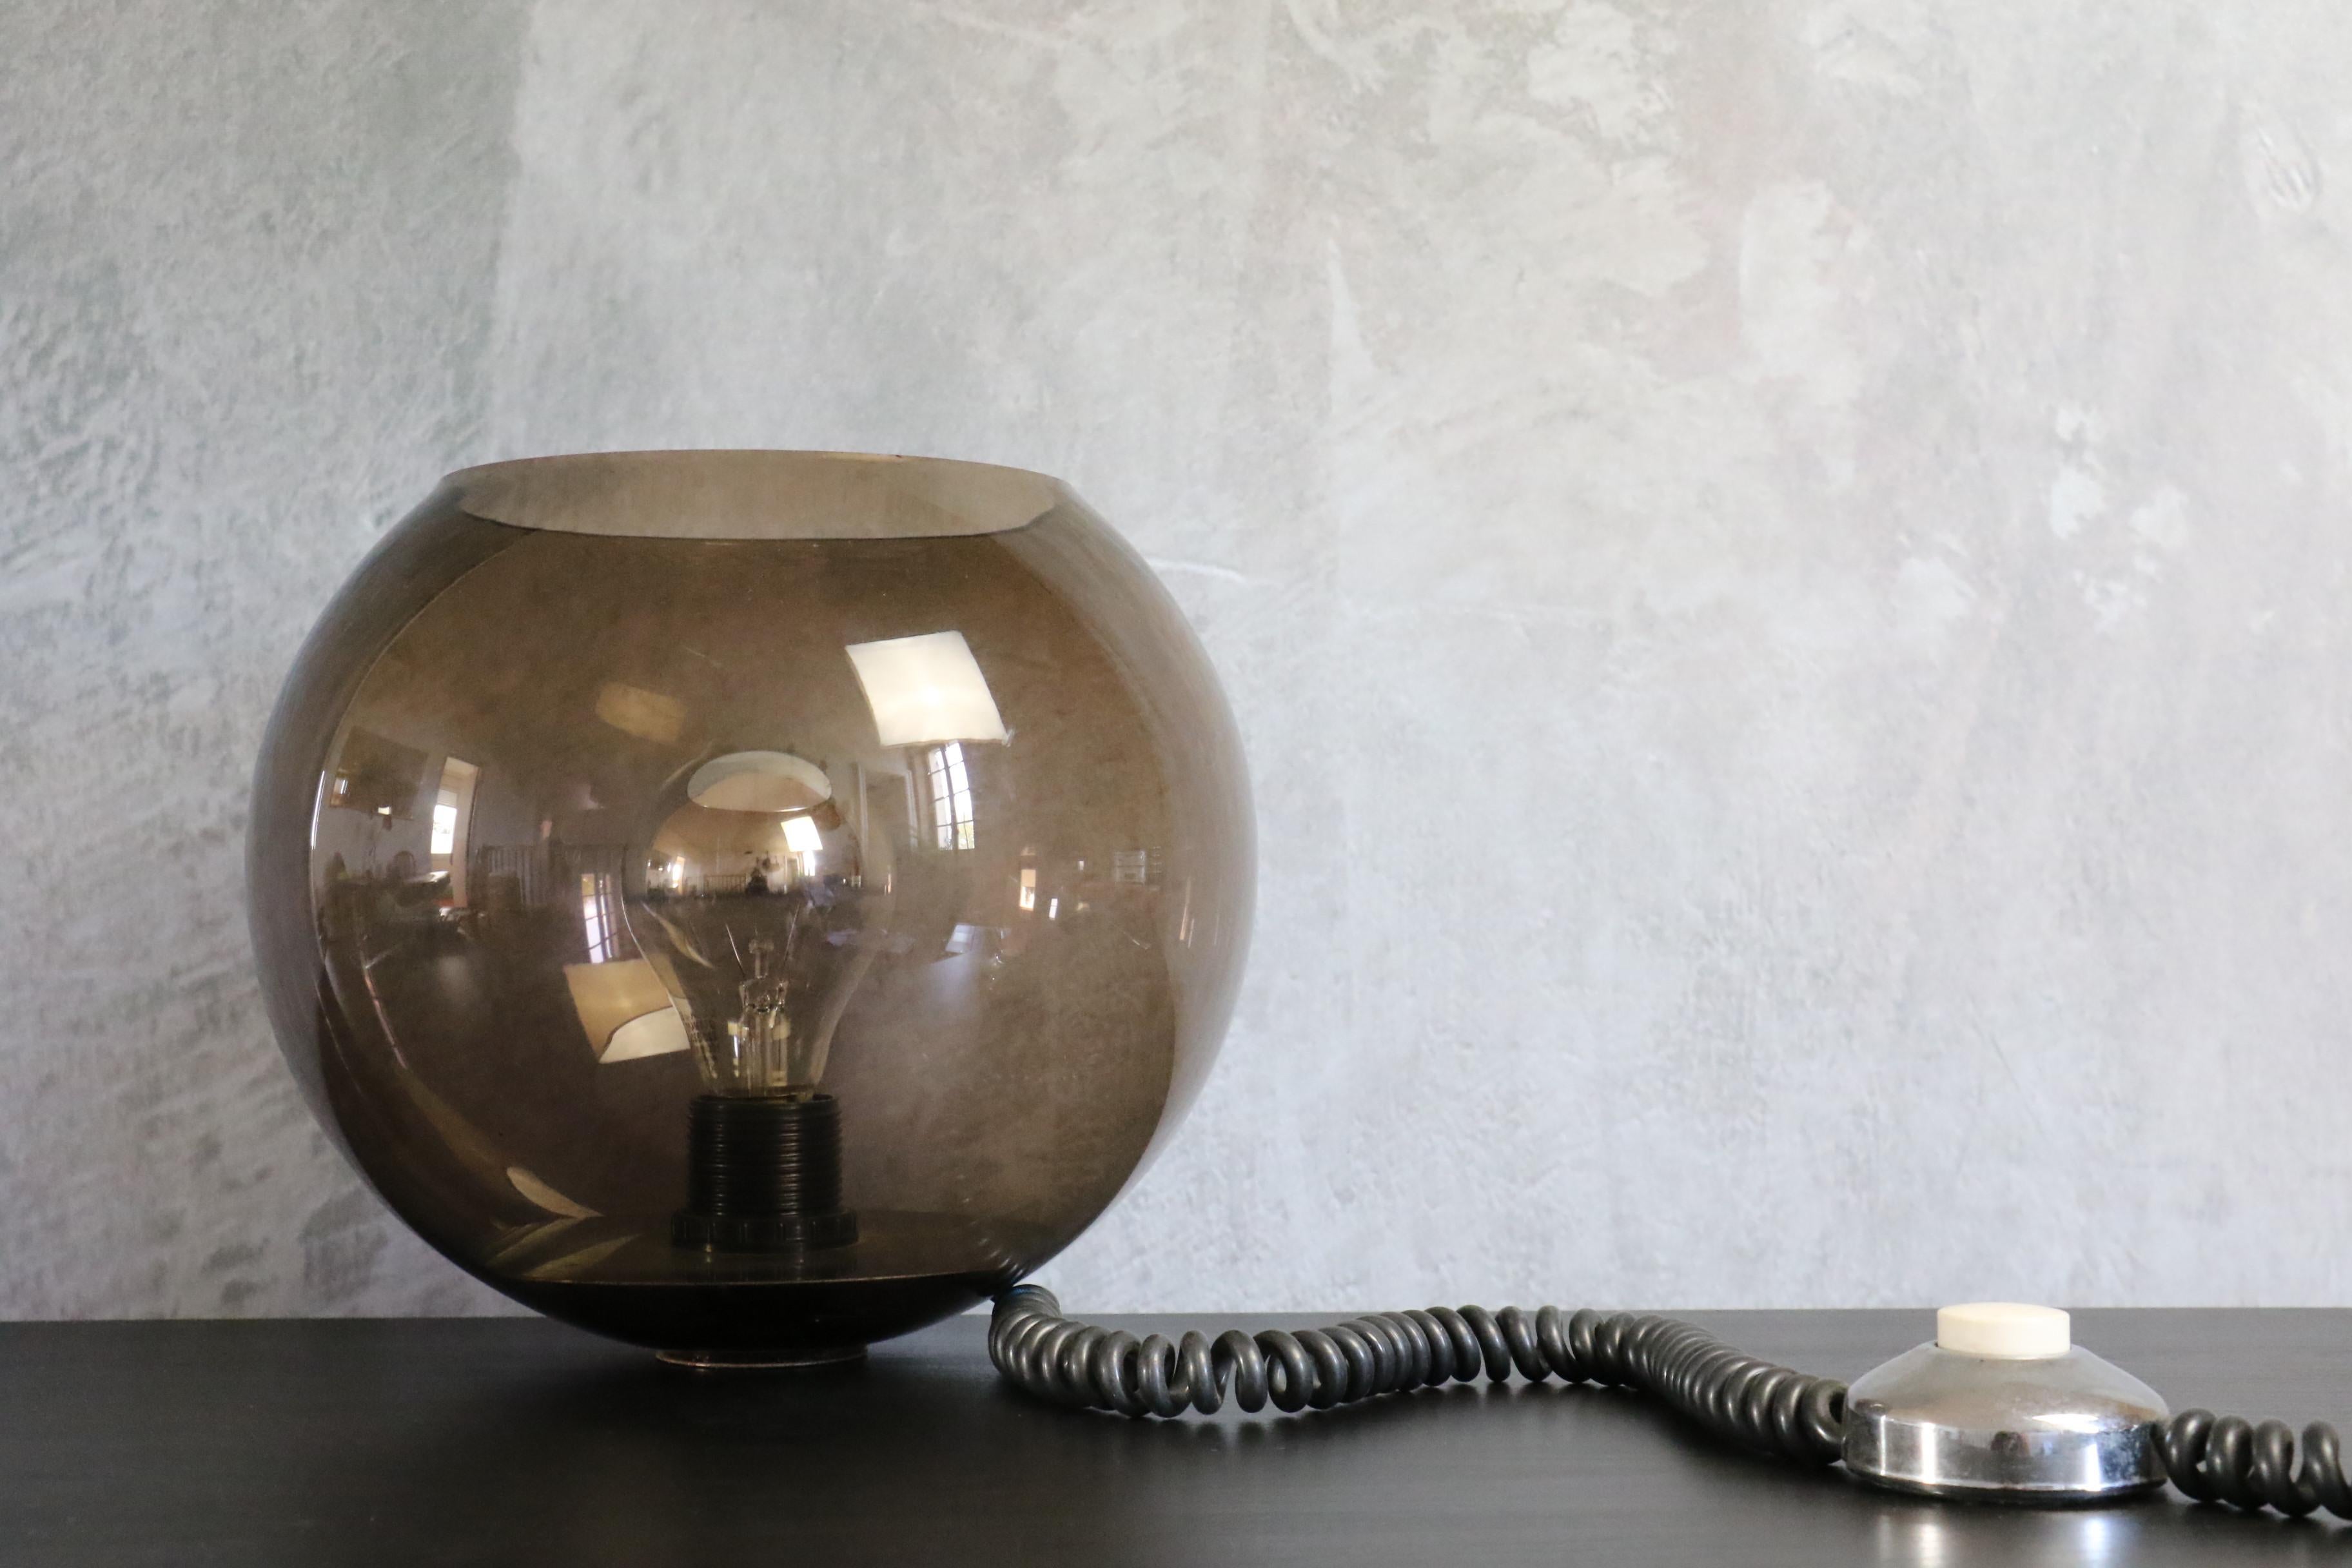 Smoked glass table lamp - desk lamp - 1970s. 
In the style of Guzzini or Reggiani

Beautifully executed. This light offers an elegant and simple, design and high-quality construction.

In good condition regarding the age of the object.